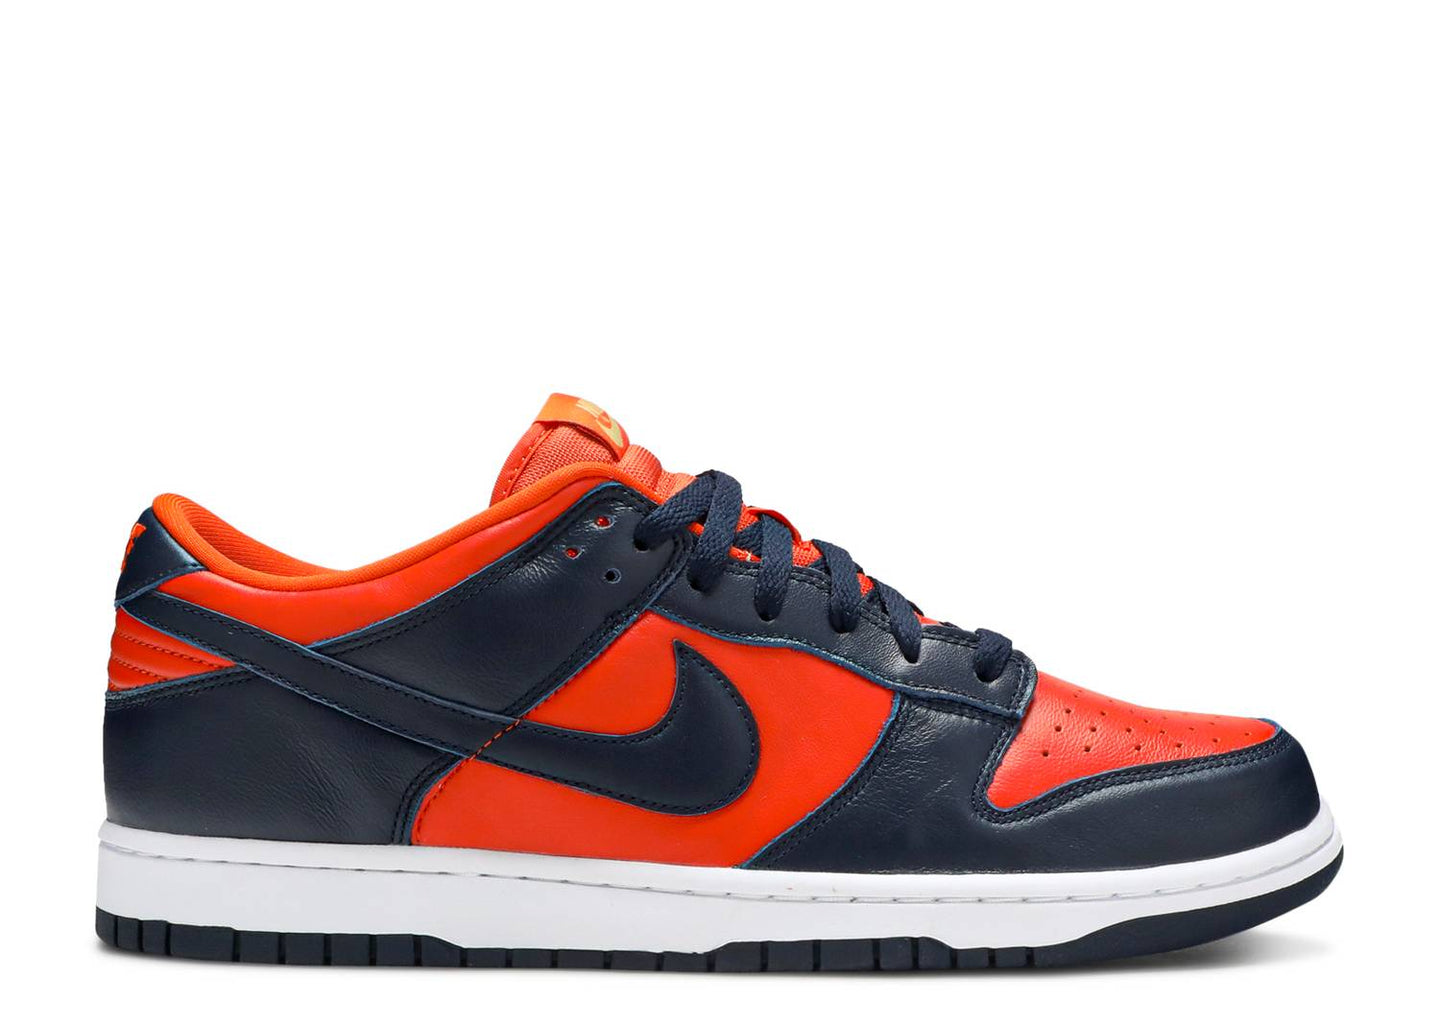 Nike Dunk Low SP Champ